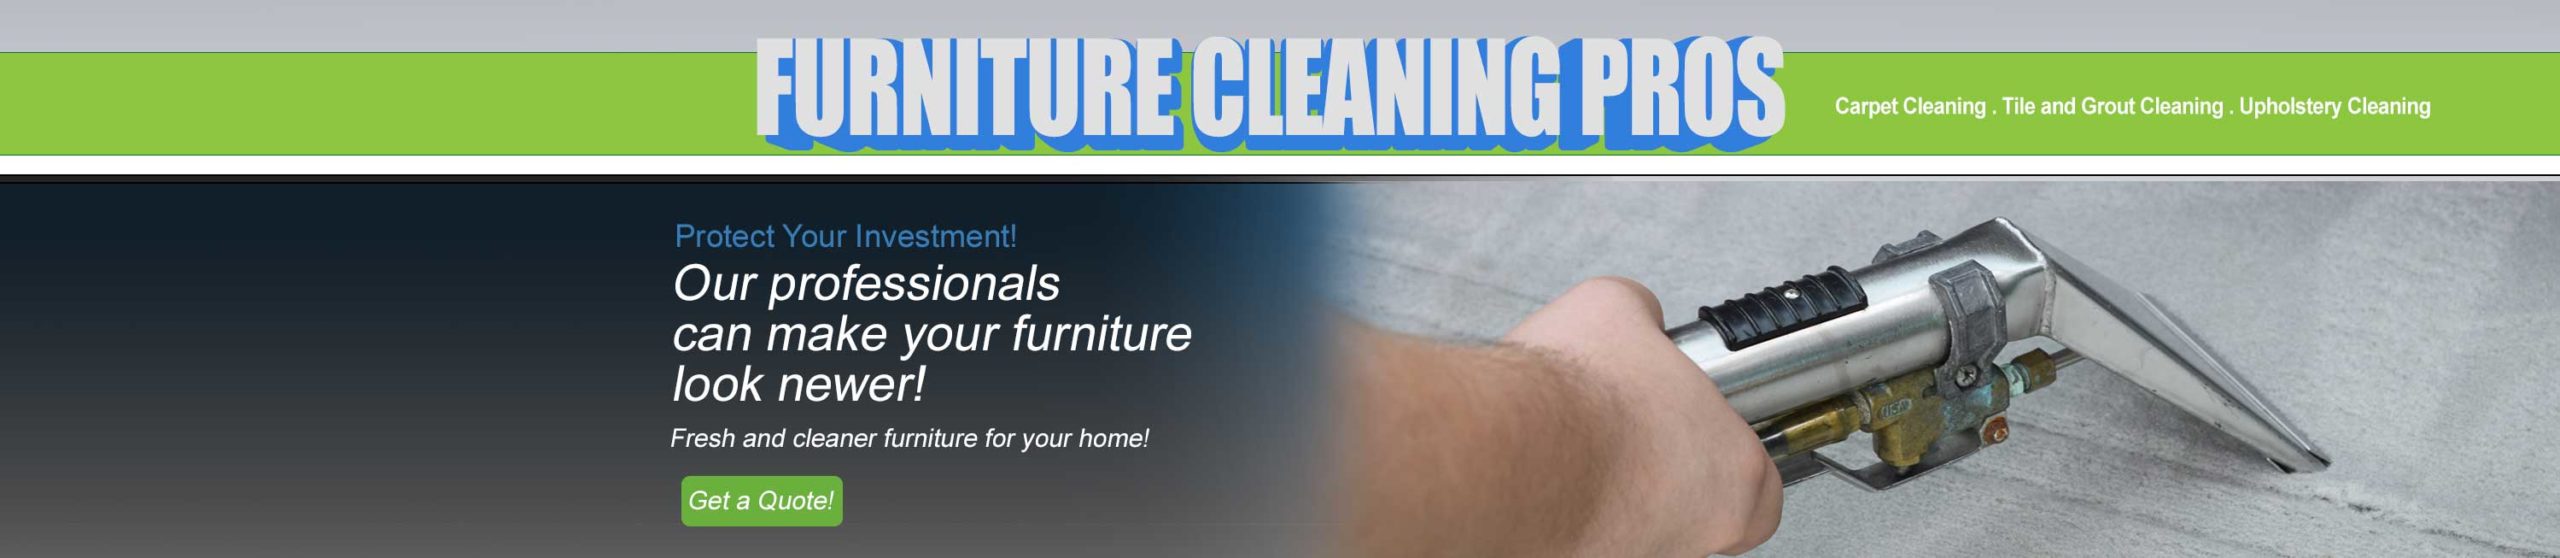 Furniture and upholstery cleaning in Maricopa AZ